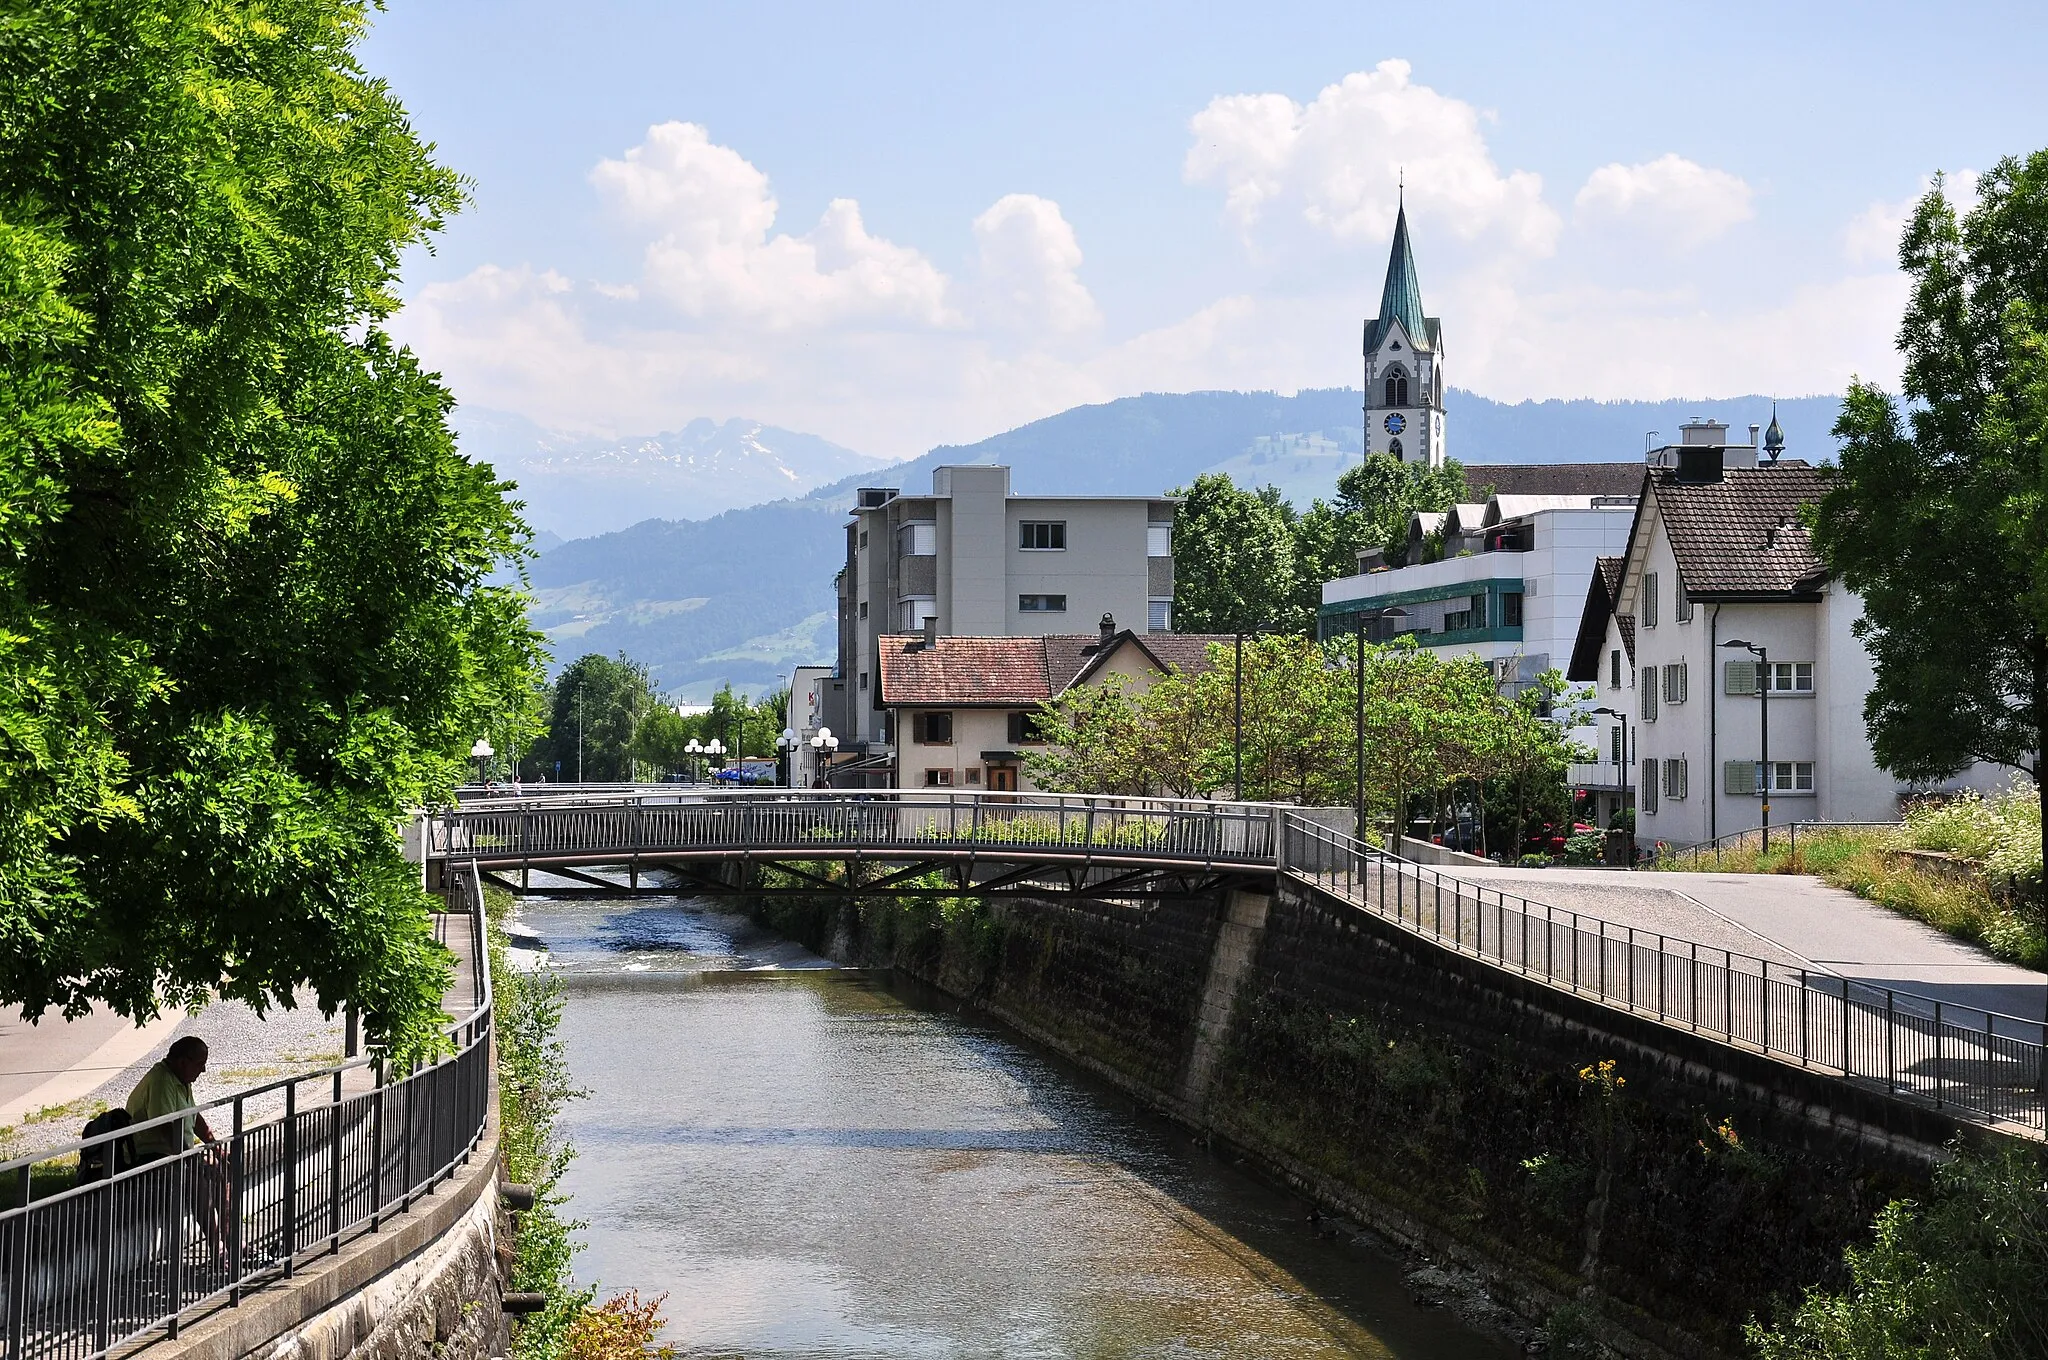 Photo showing: Jona river in Jona (SG), Mariae Himmelfahrt & St. Valentin in the background (to the right).